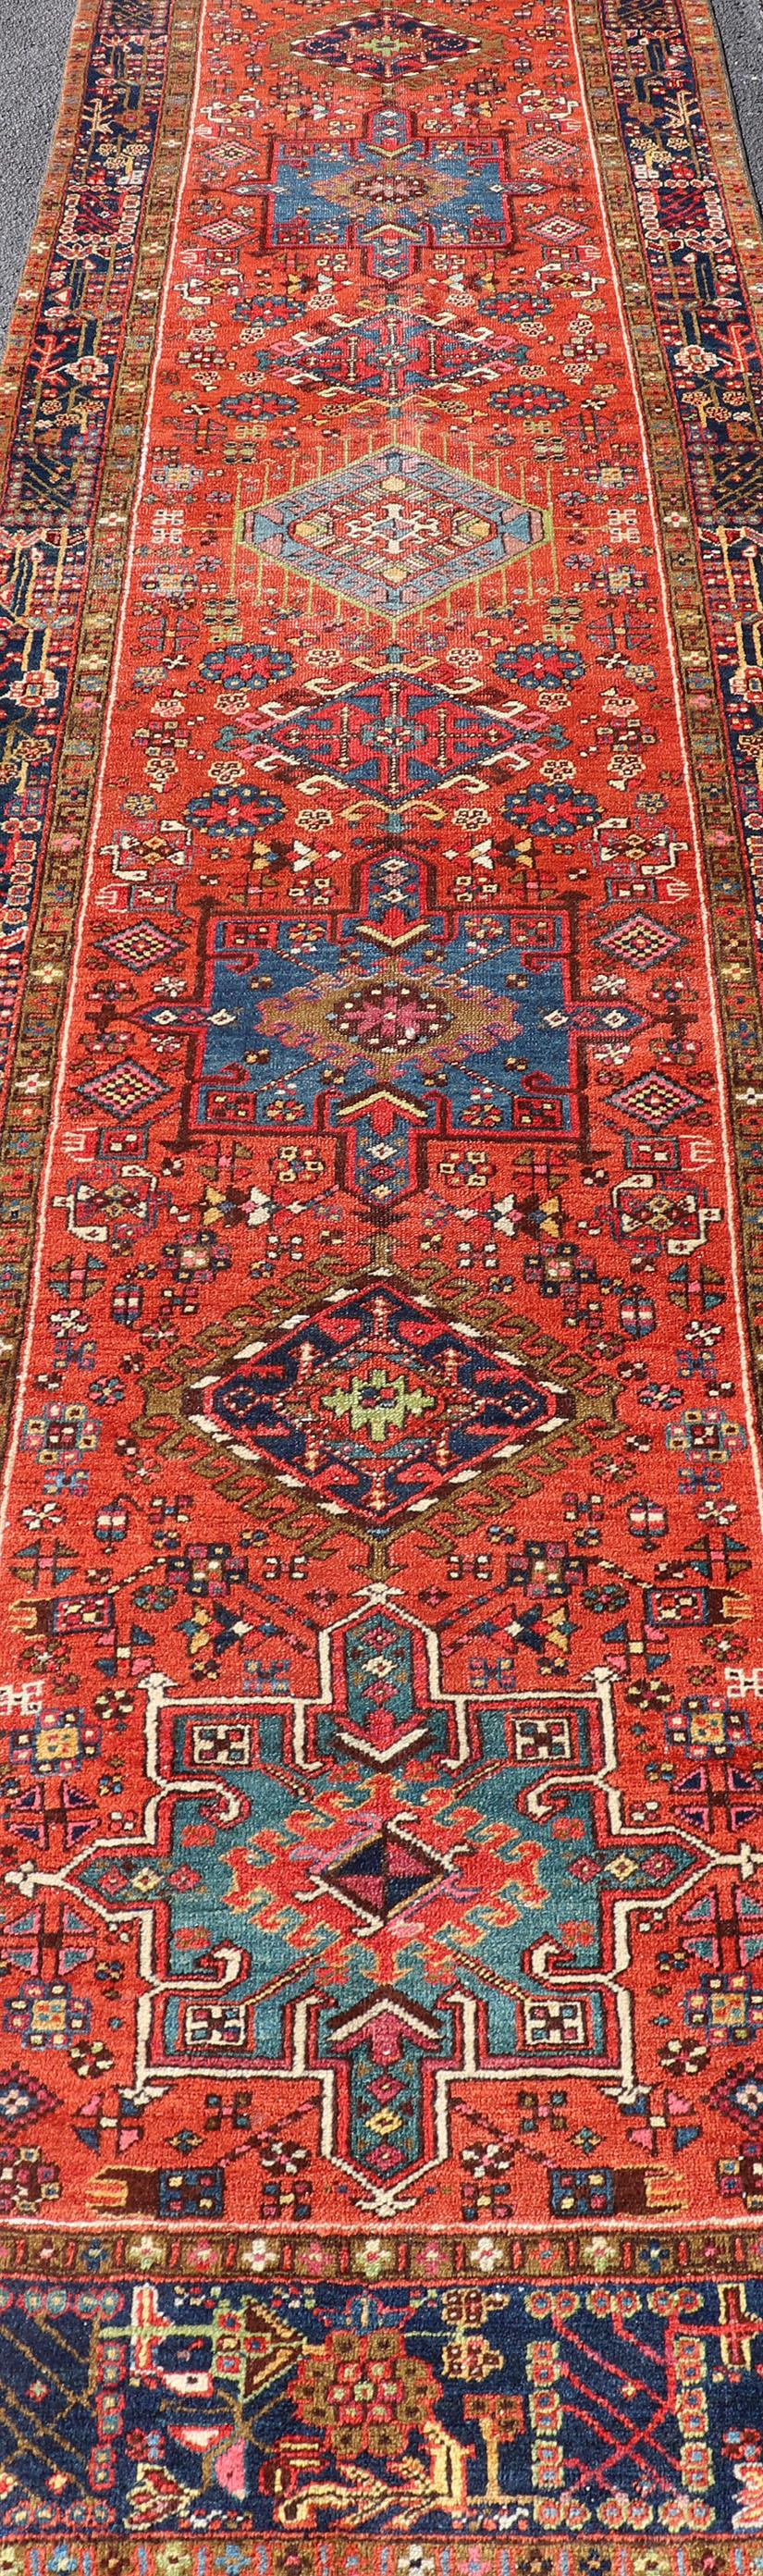 Antique Hand Knotted Geometric Persian Long Heriz Runner in Red, Blue and Teal For Sale 3